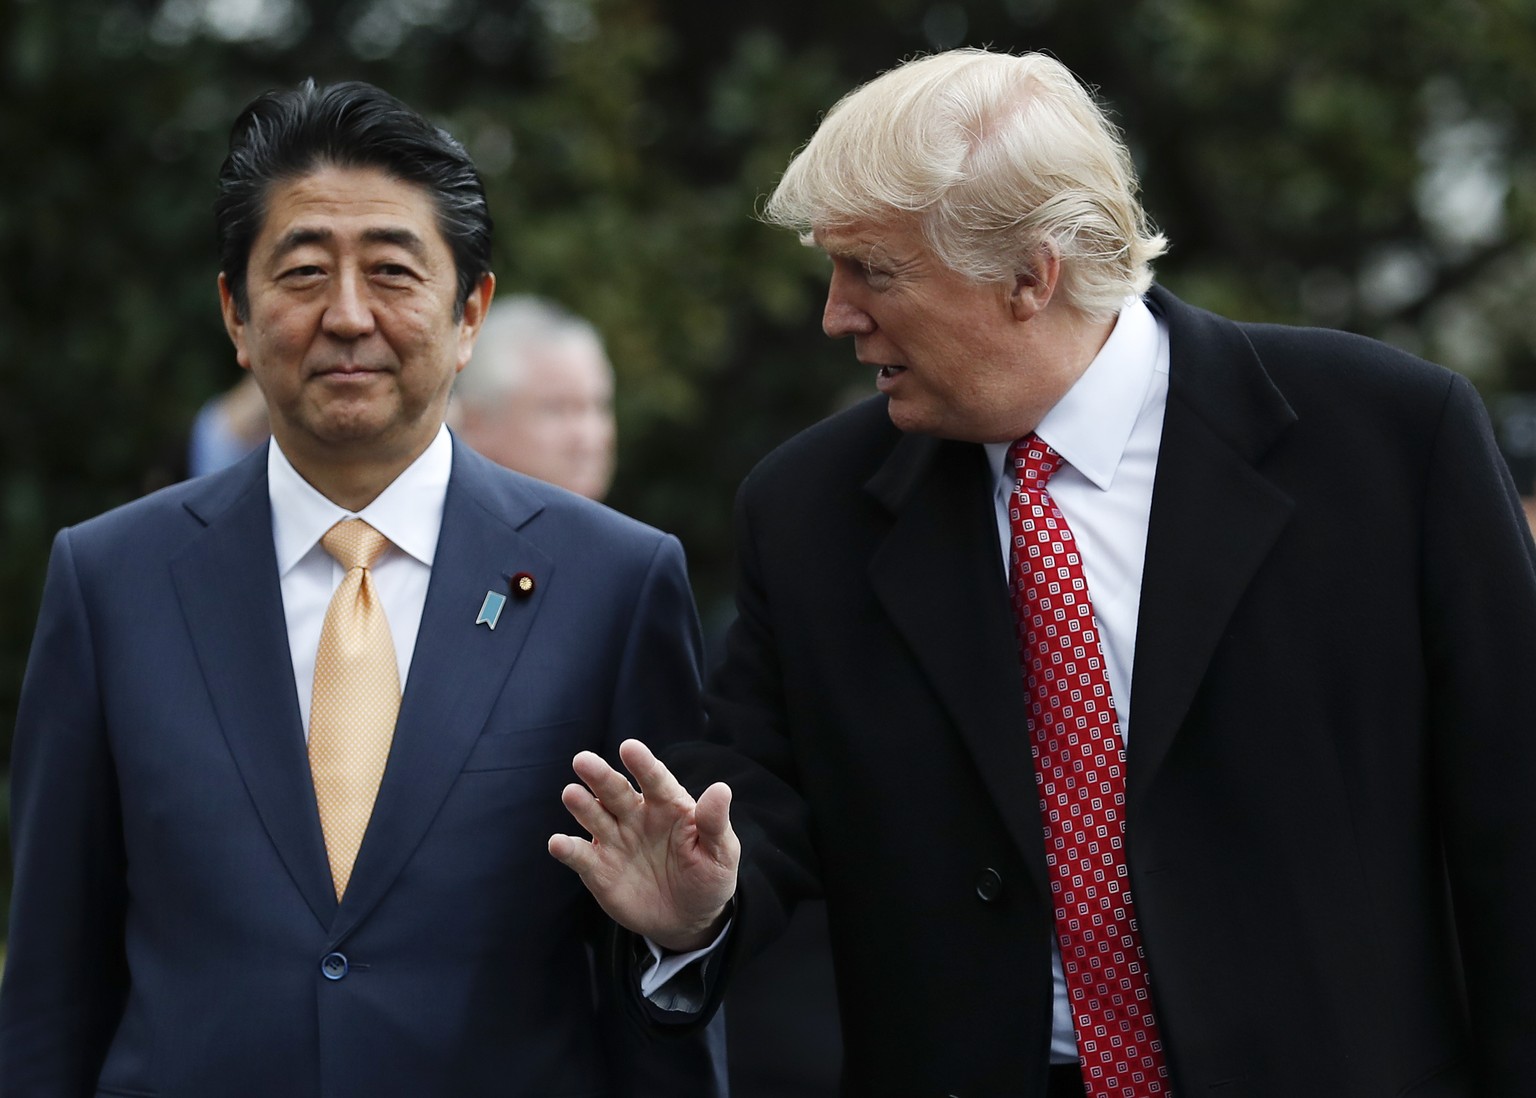 President Donald Trump talks to Japanese Prime Minister Shinzo Abe as they pause before boarding Marine One on the South Lawn of the White House in Washington, Friday, Feb. 10, 2017, for the short tri ...